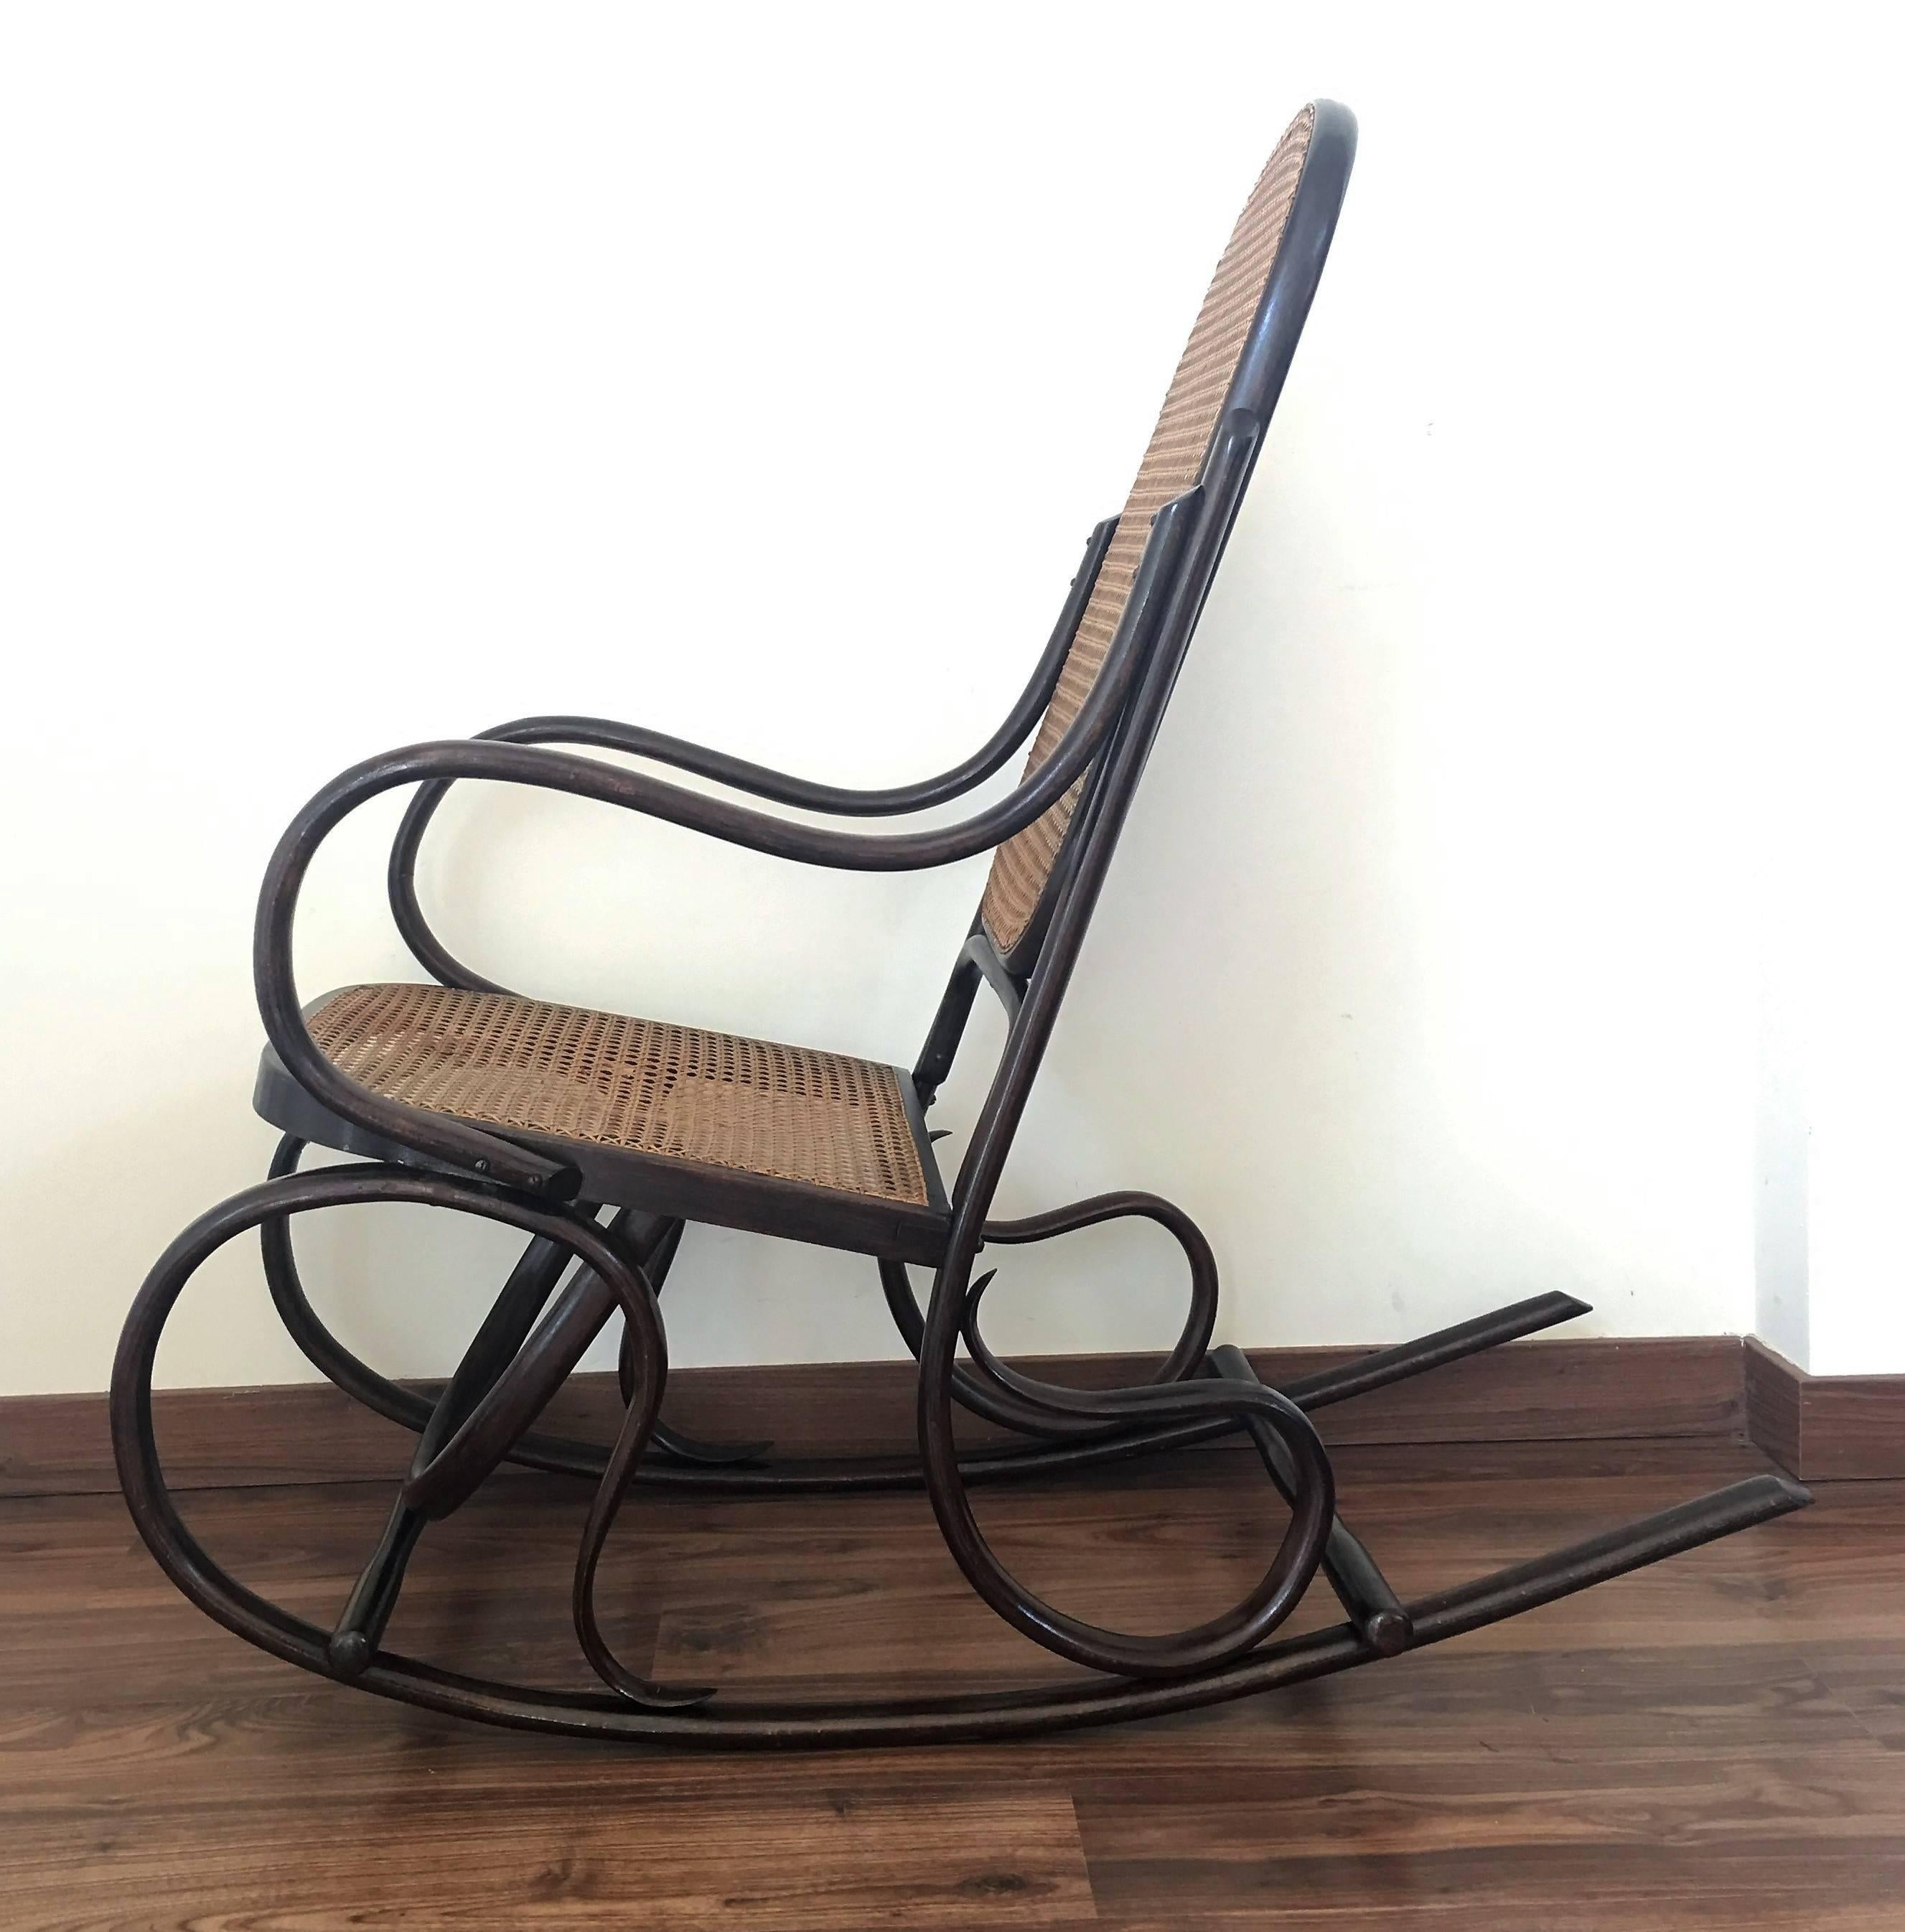 This model is inspired by the Thonet no. 10 rocker from circa 1880.
It´s made in Spain, circa 1940-1950.
It was restored and it´s in perfect shape.

